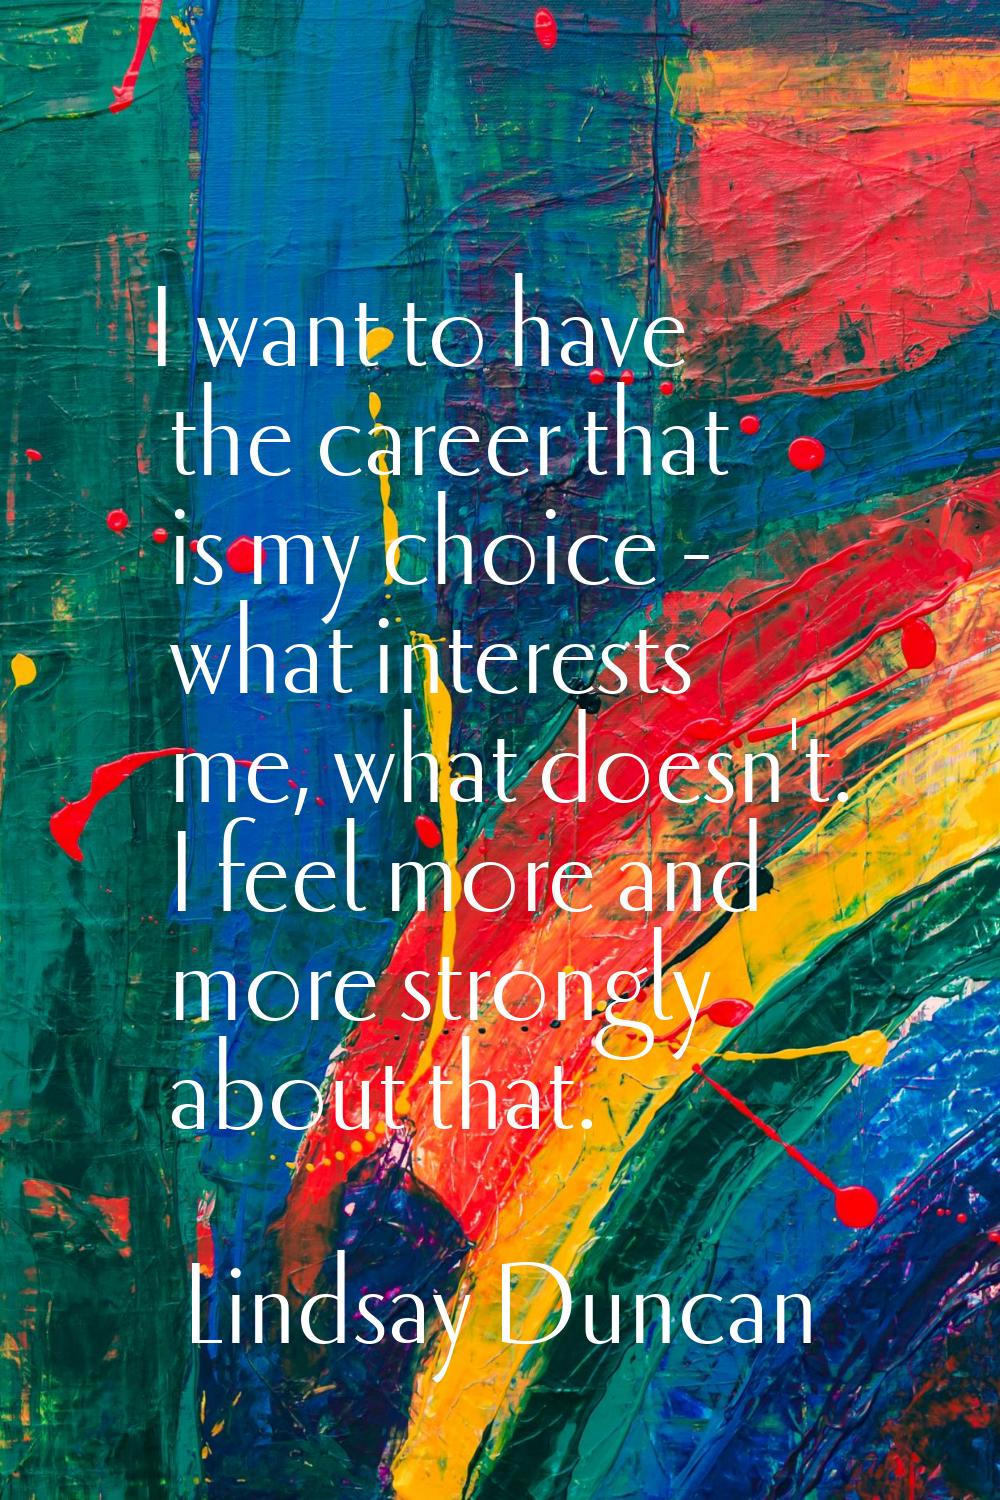 I want to have the career that is my choice - what interests me, what doesn't. I feel more and more